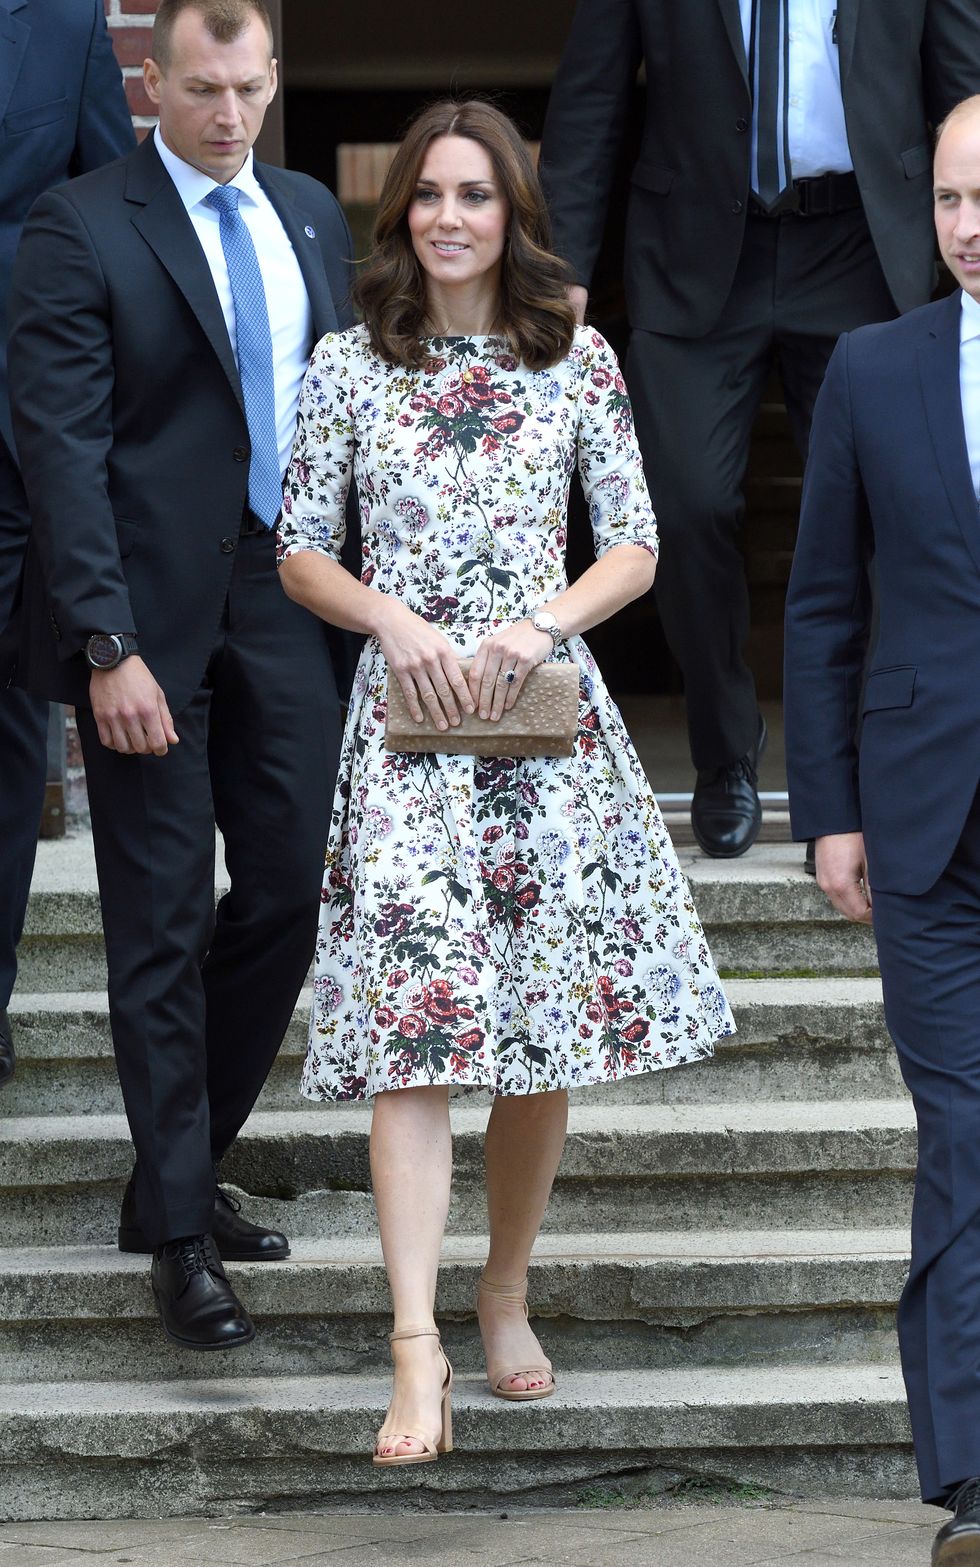 STUTTHOF, POLAND - JULY 18:  Catherine, Duchess of Cambridge visits the former Nazi Germany Concentration Camp during day 2 of their Royal Tour of Poland and Germany on July 18, 2017 in Stutthof, Poland.  (Photo by Karwai Tang/WireImage)